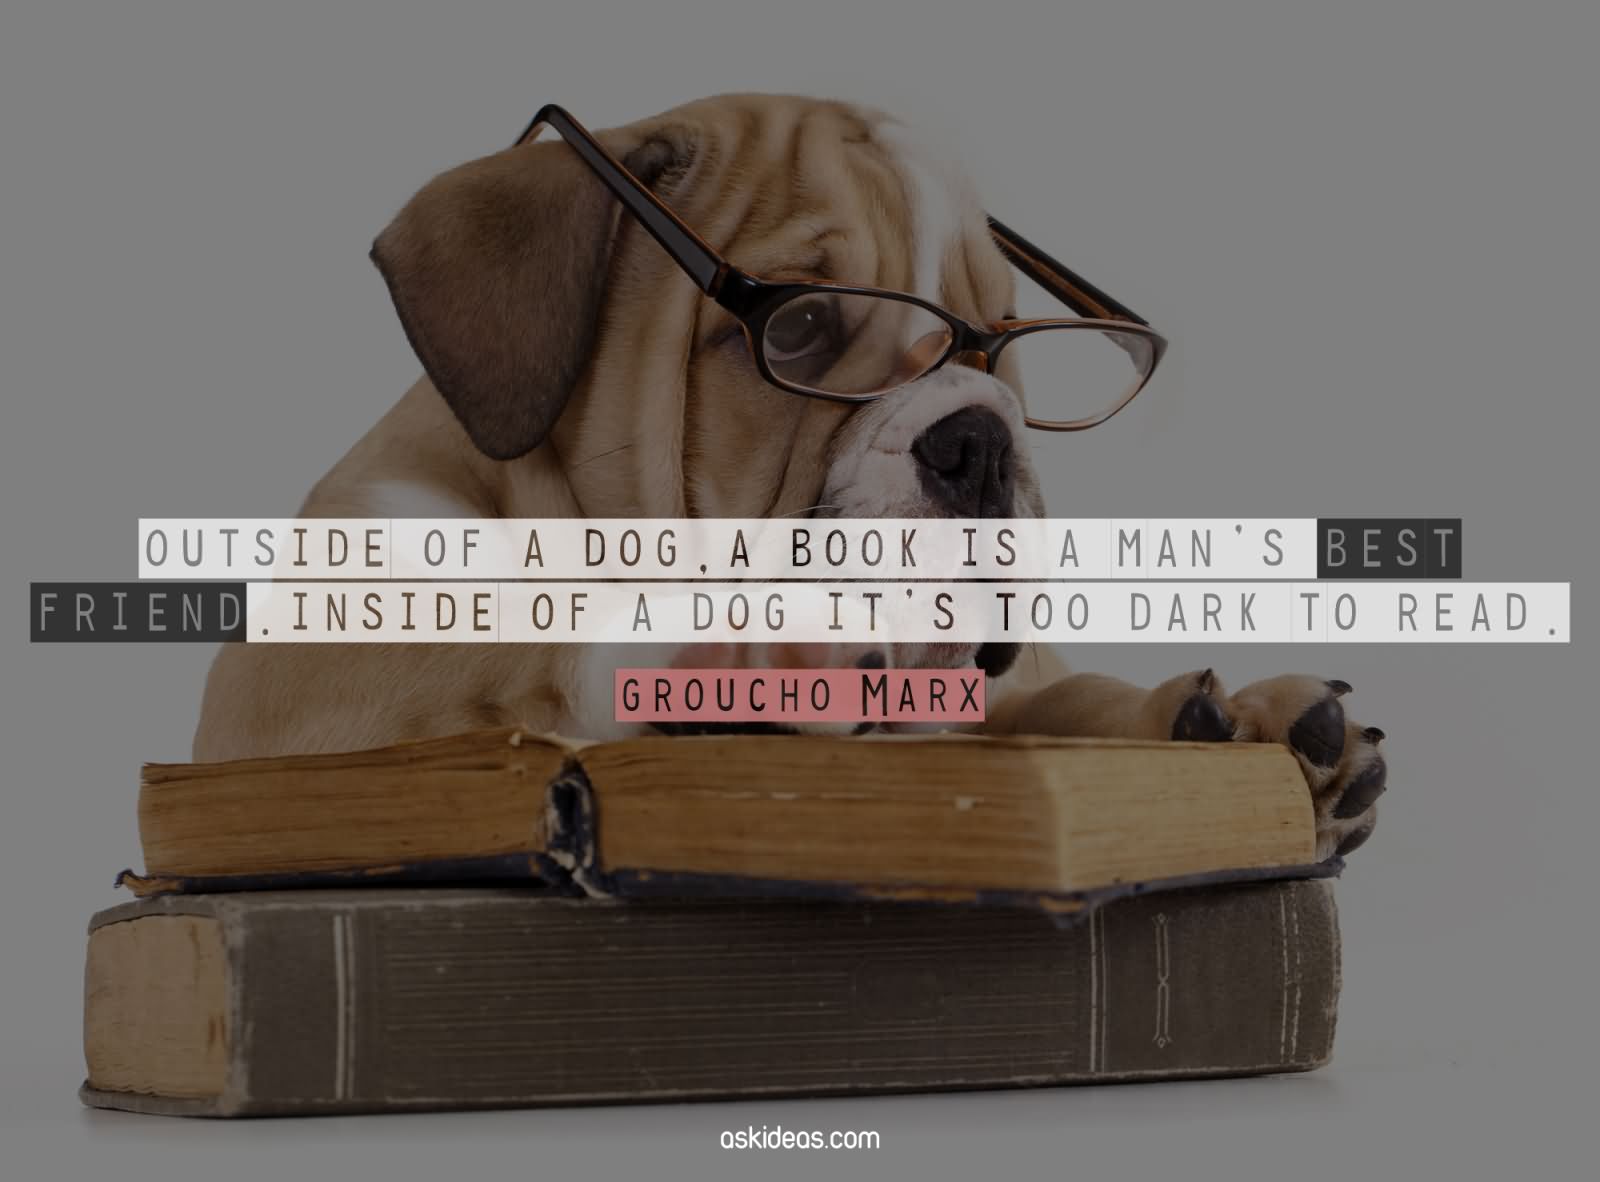 Outside of a dog, a book is a man’s best friend